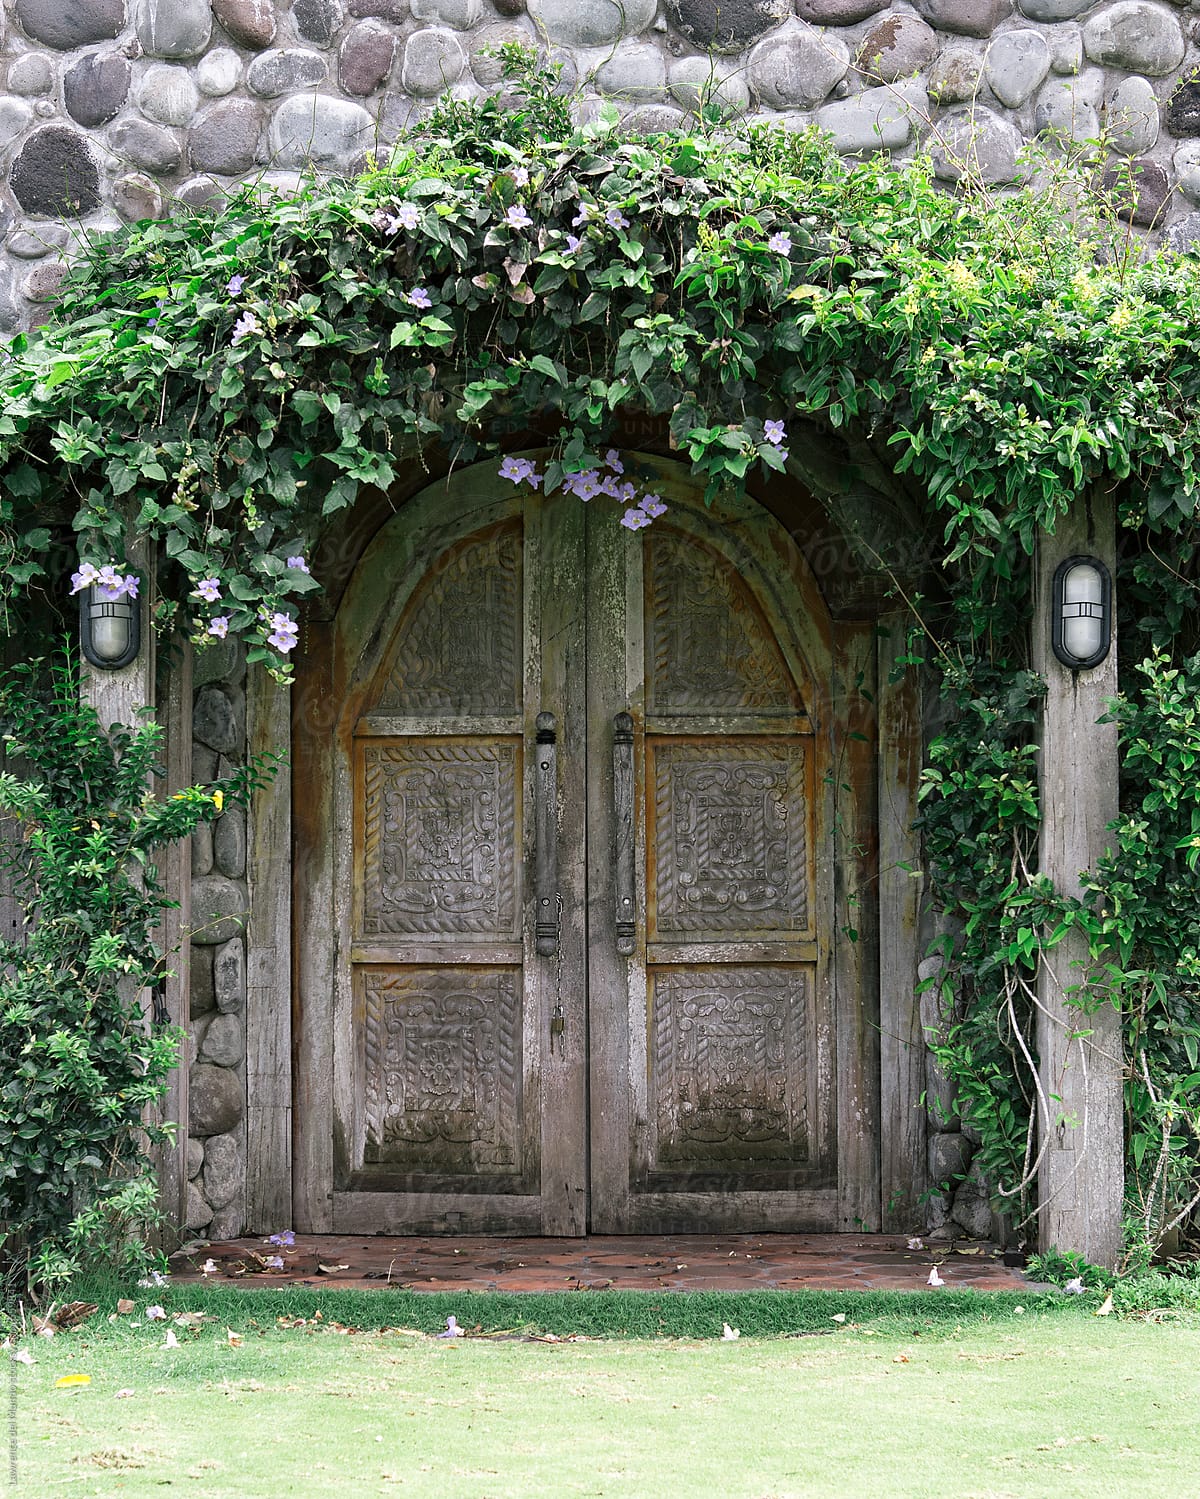 Vines and flowers adorn a wooden door main entrance of a chapel on a hill